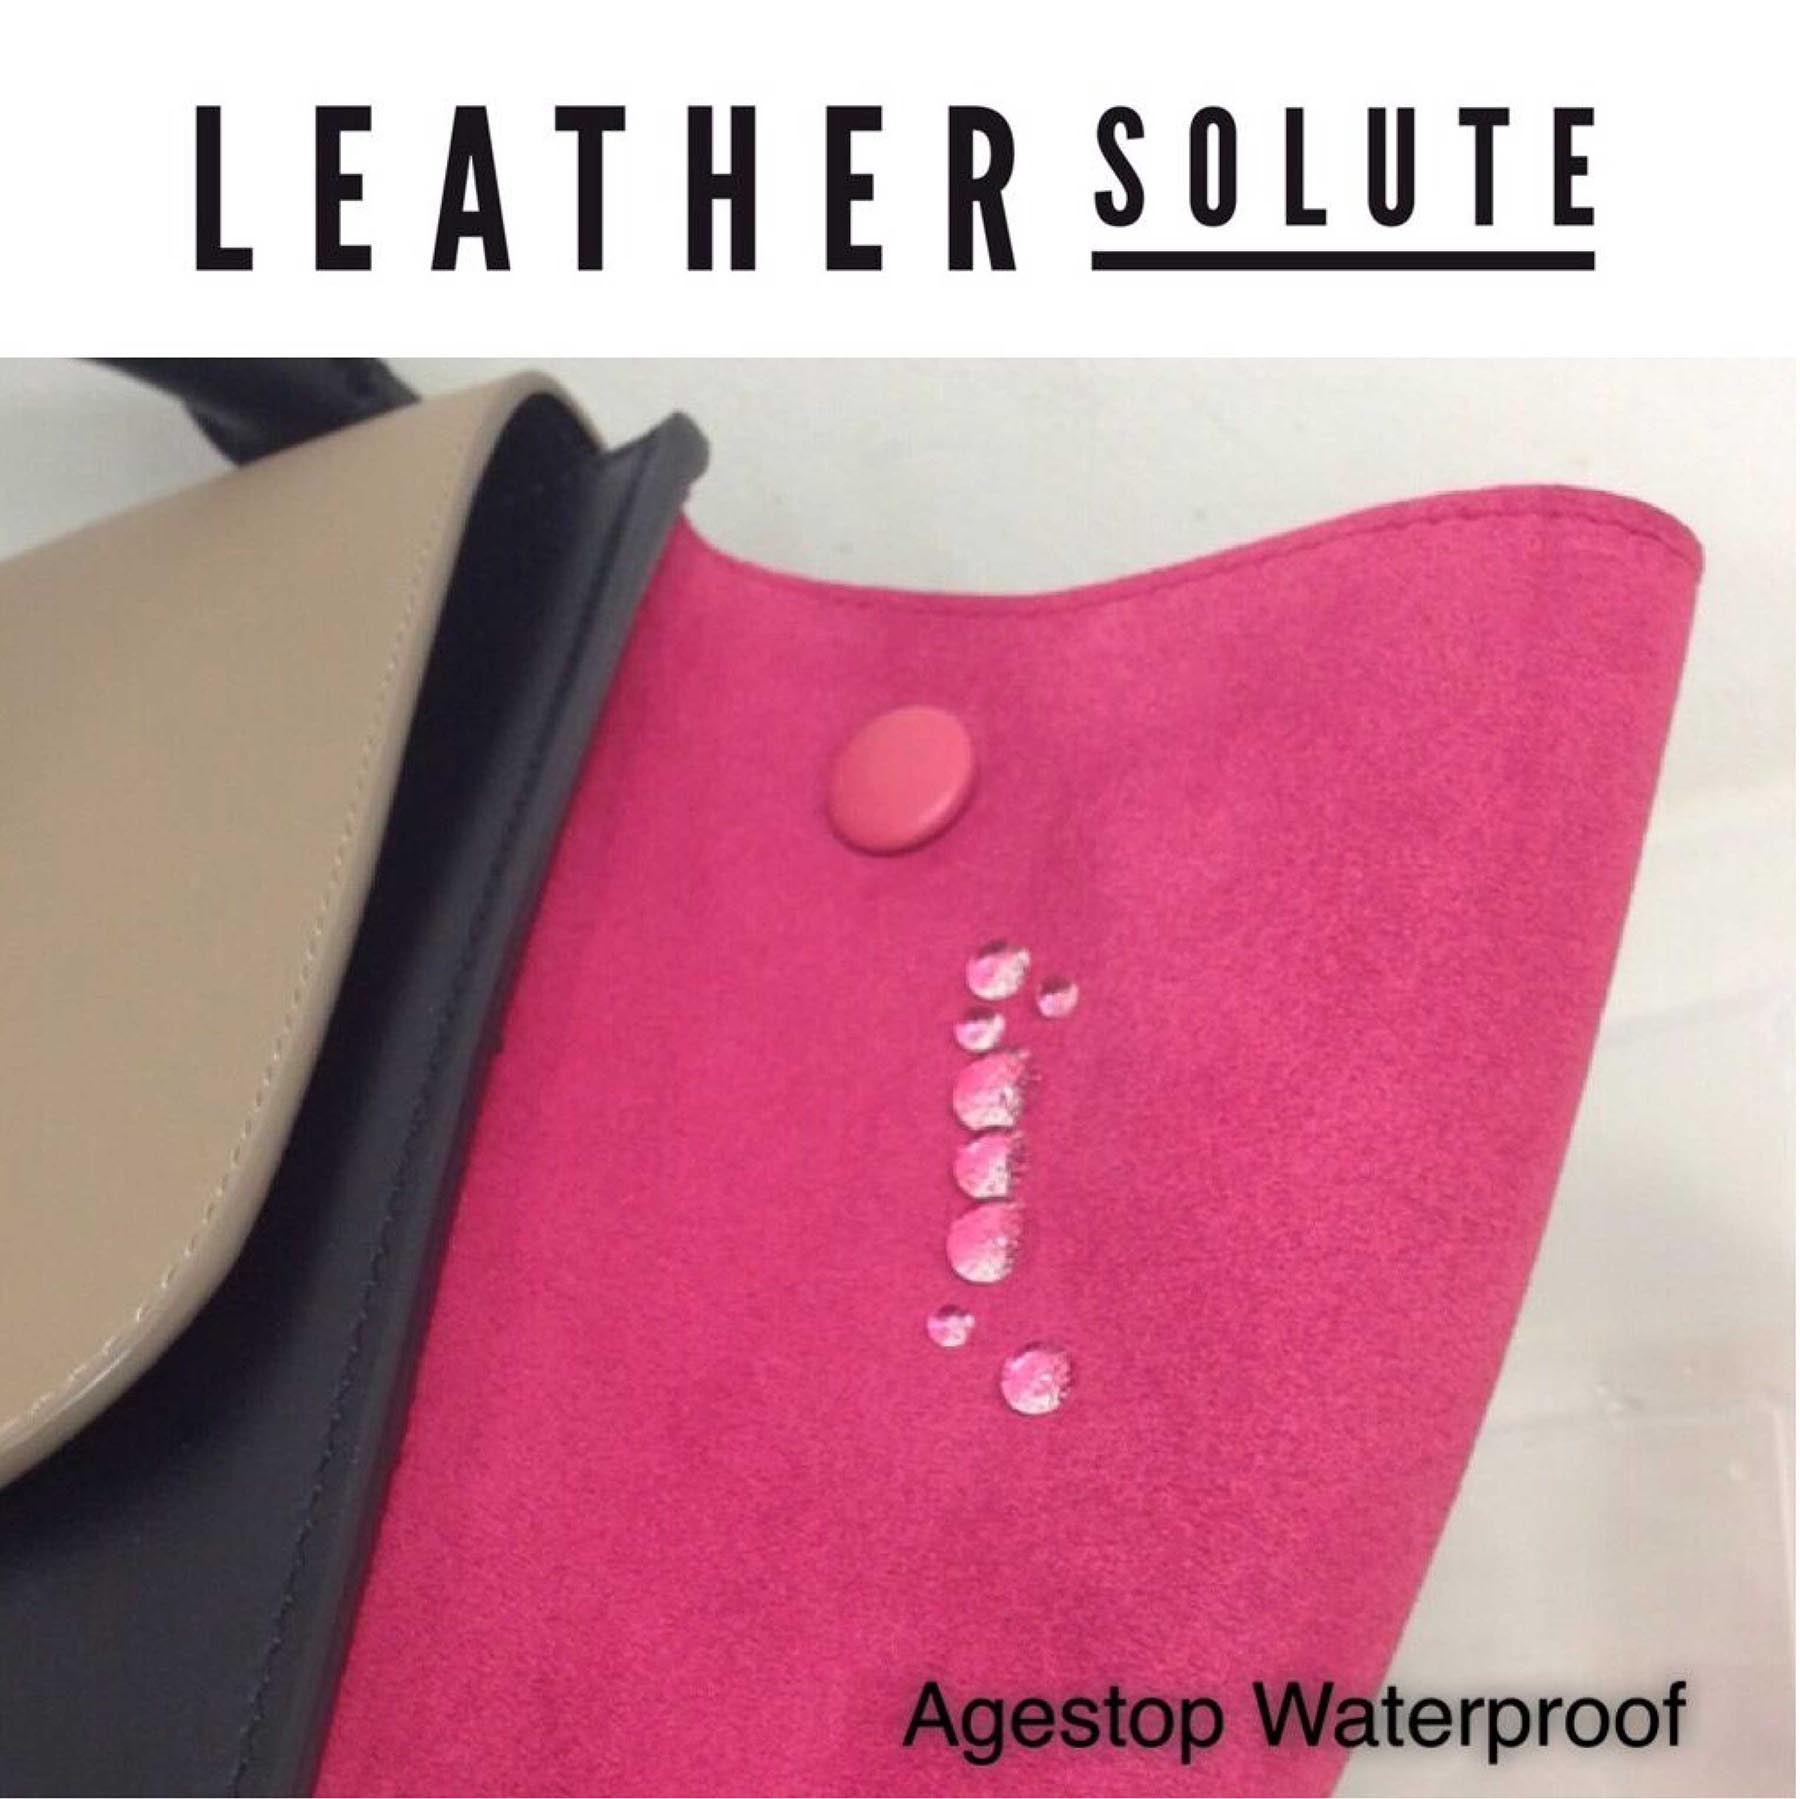 //leathersolute.co.th/wp-content/uploads/2018/11/age-stop-coating-2.jpg